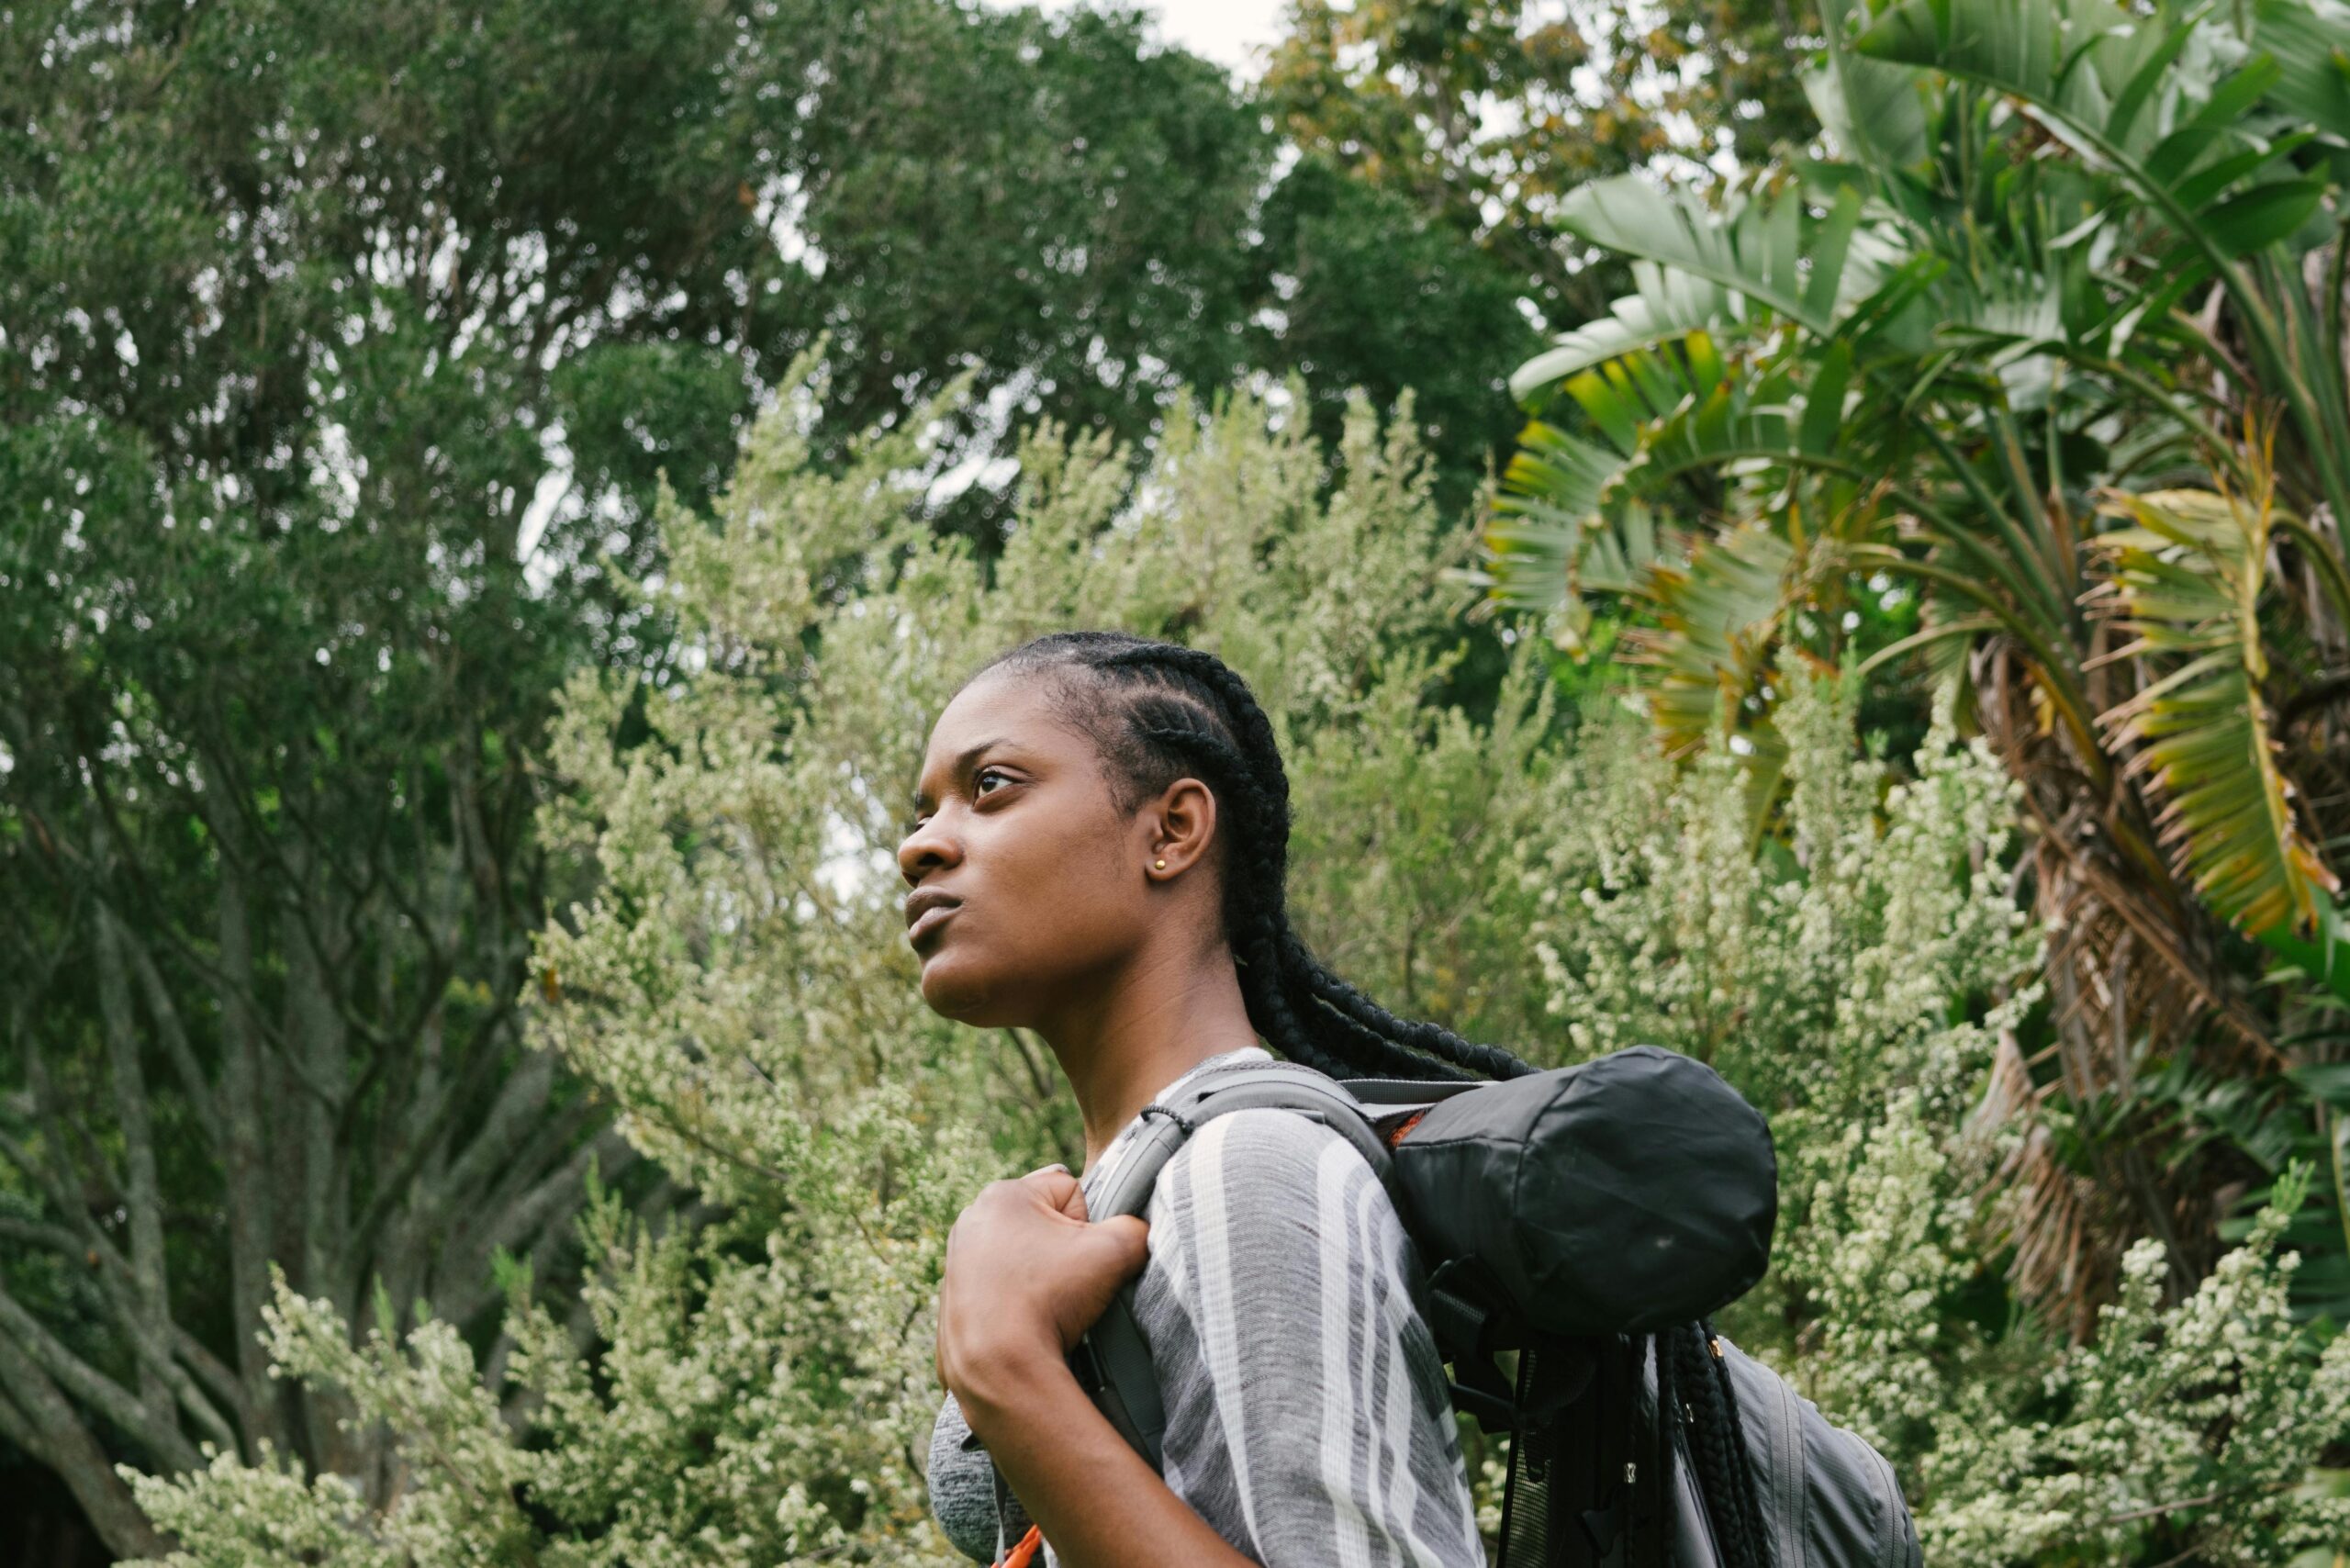 Learn more about the study that looks into the safety of women solo travelers. 
pictured: a Black woman backpacking by herself 